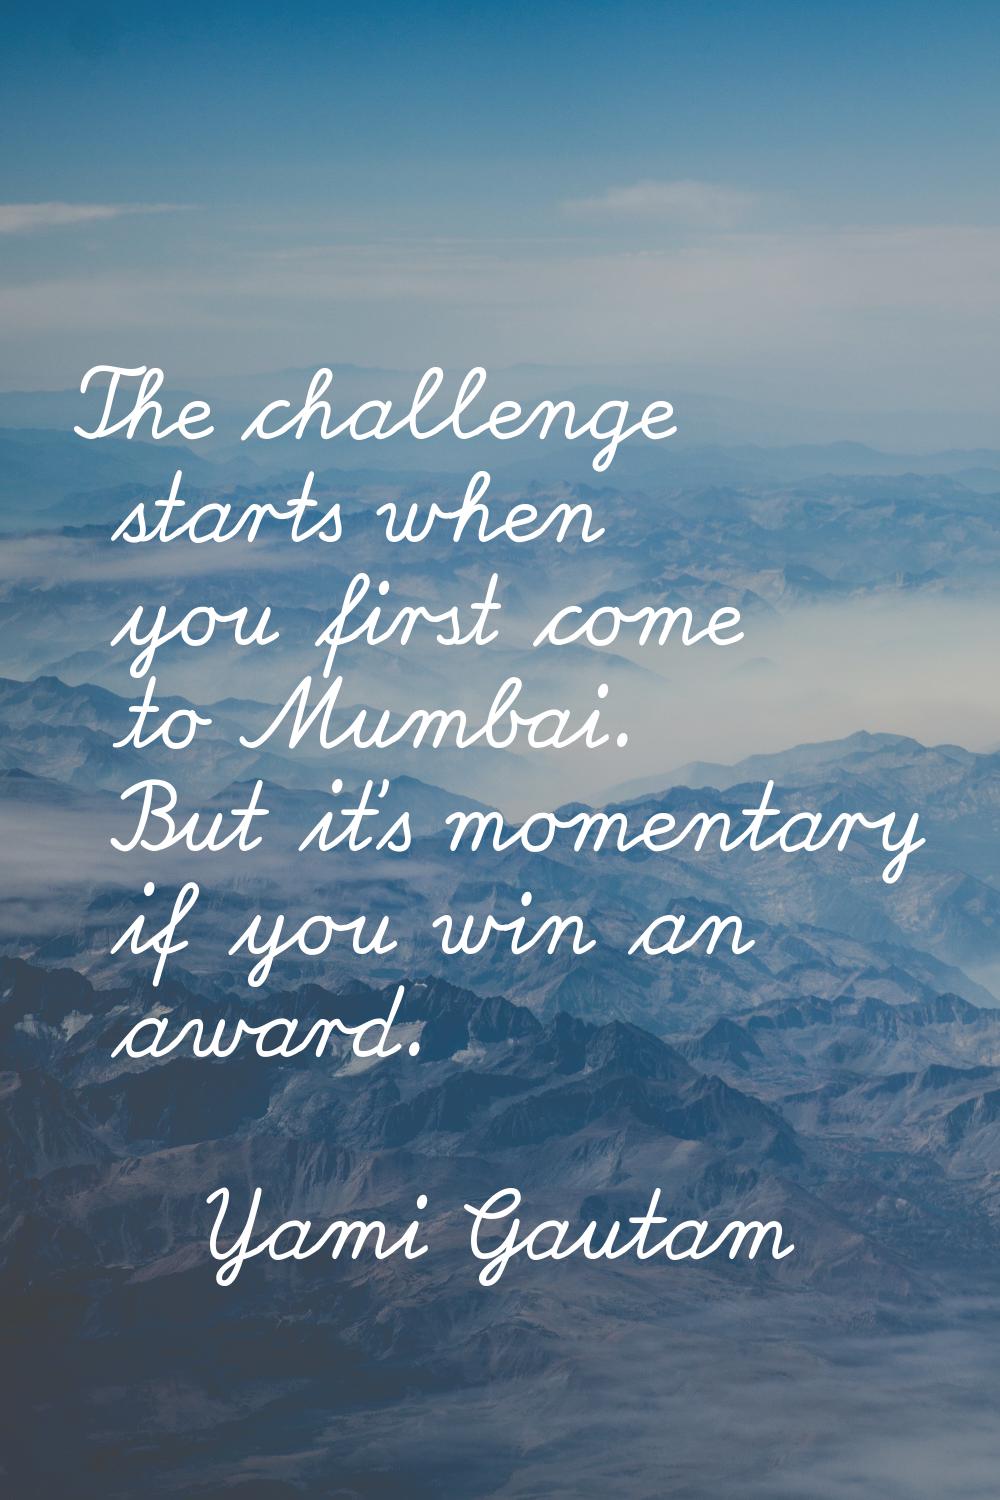 The challenge starts when you first come to Mumbai. But it's momentary if you win an award.